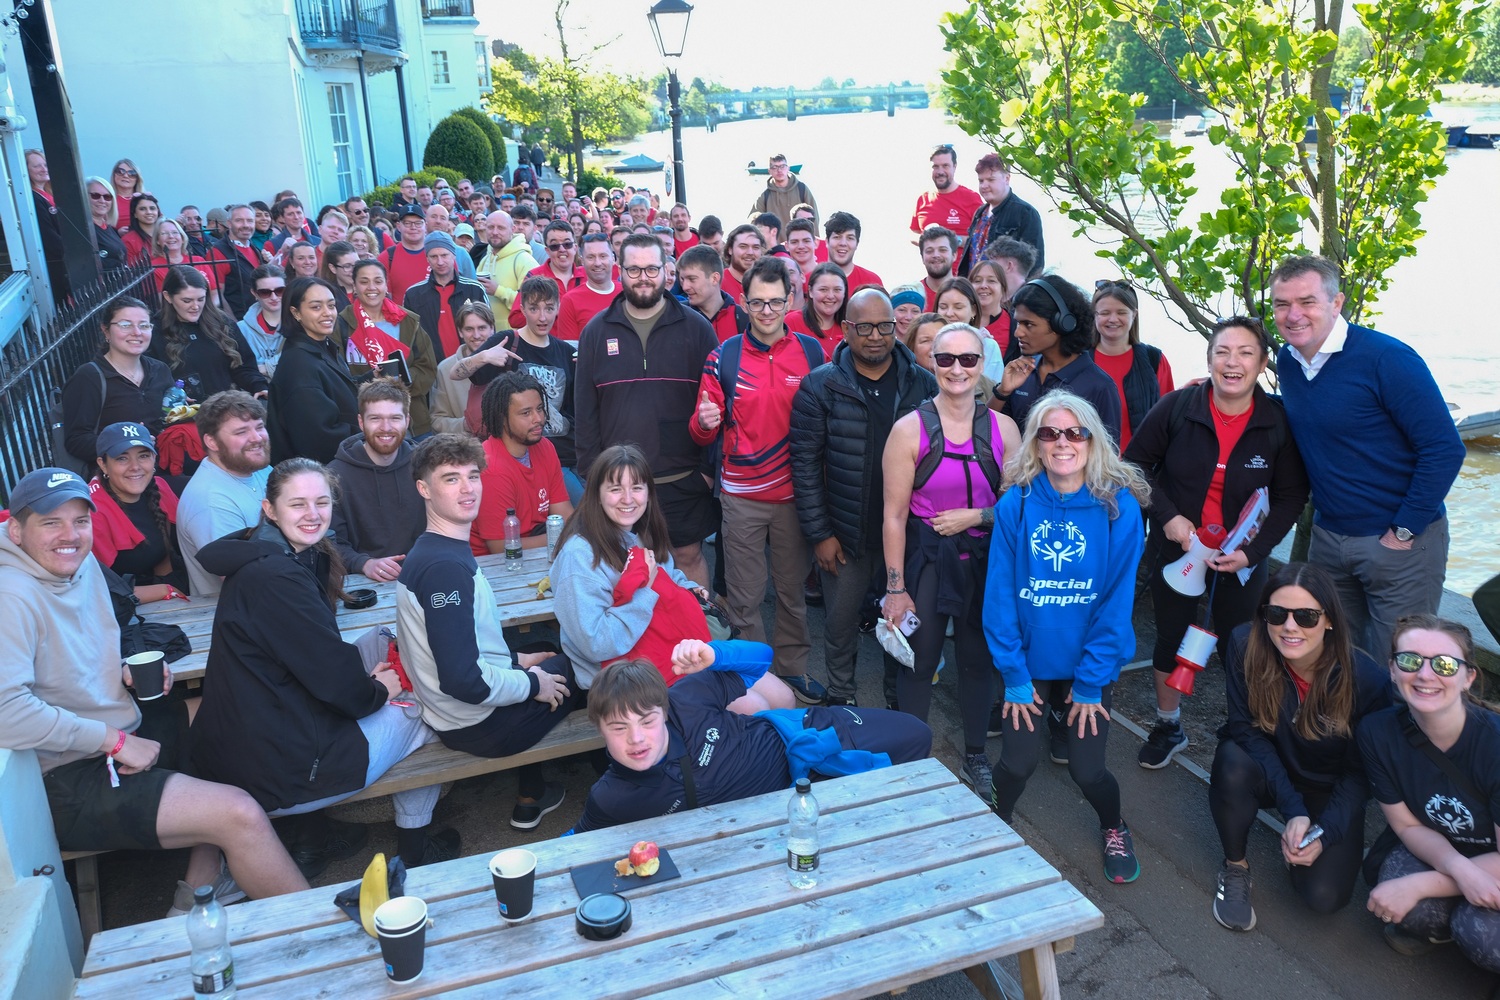 A pub walk like no other, raising cash for Special Olympics GB thumbnail